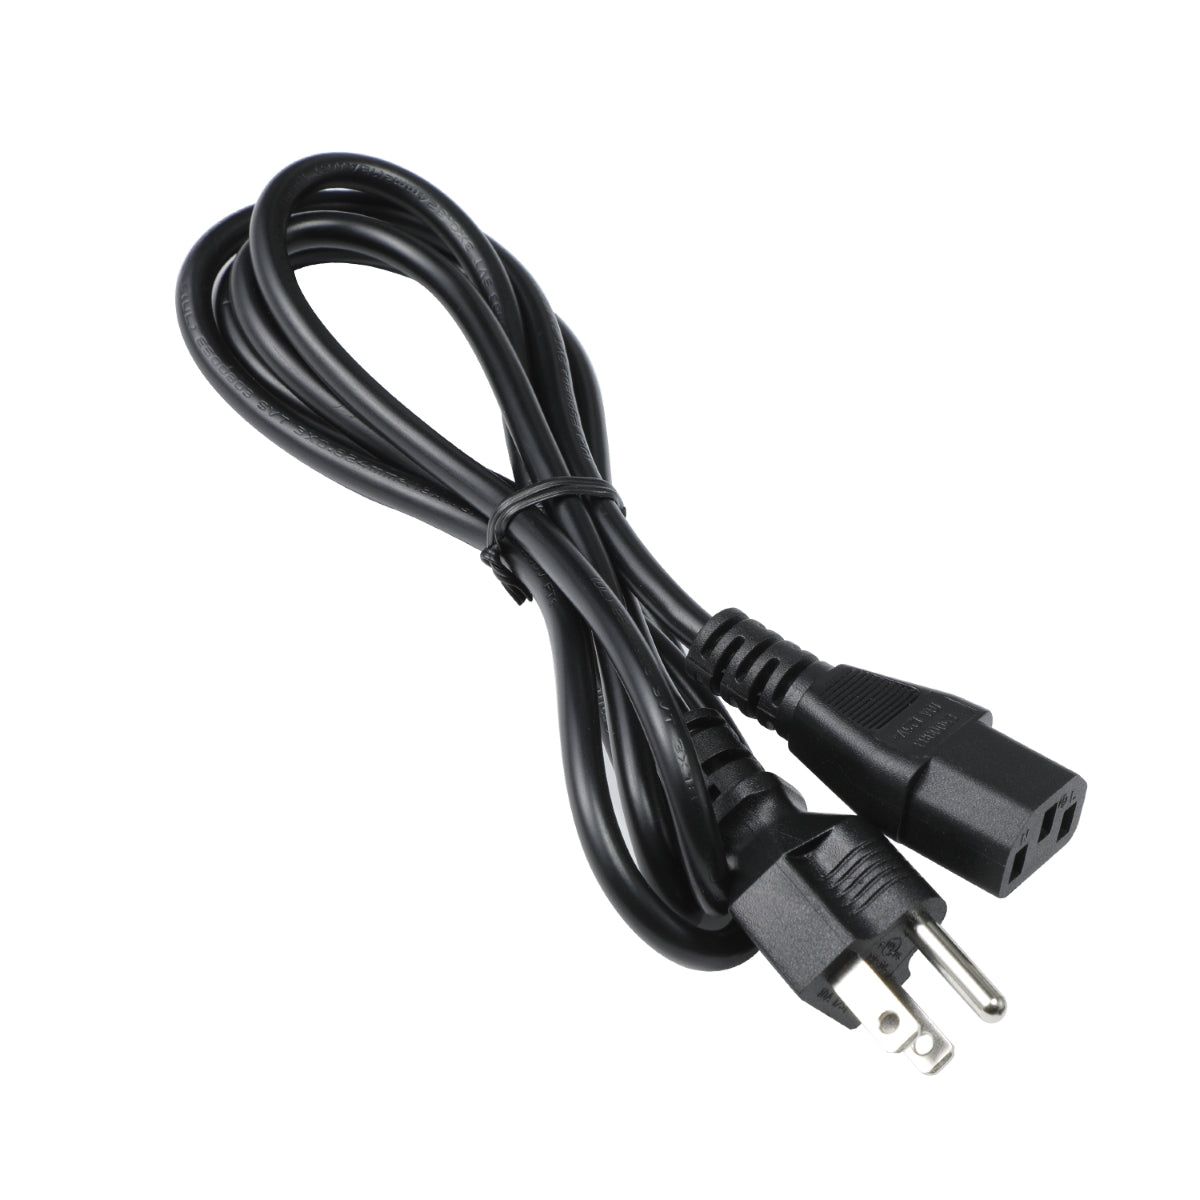 Power Cable for Philips 325E1C/27 LCD Monitor.